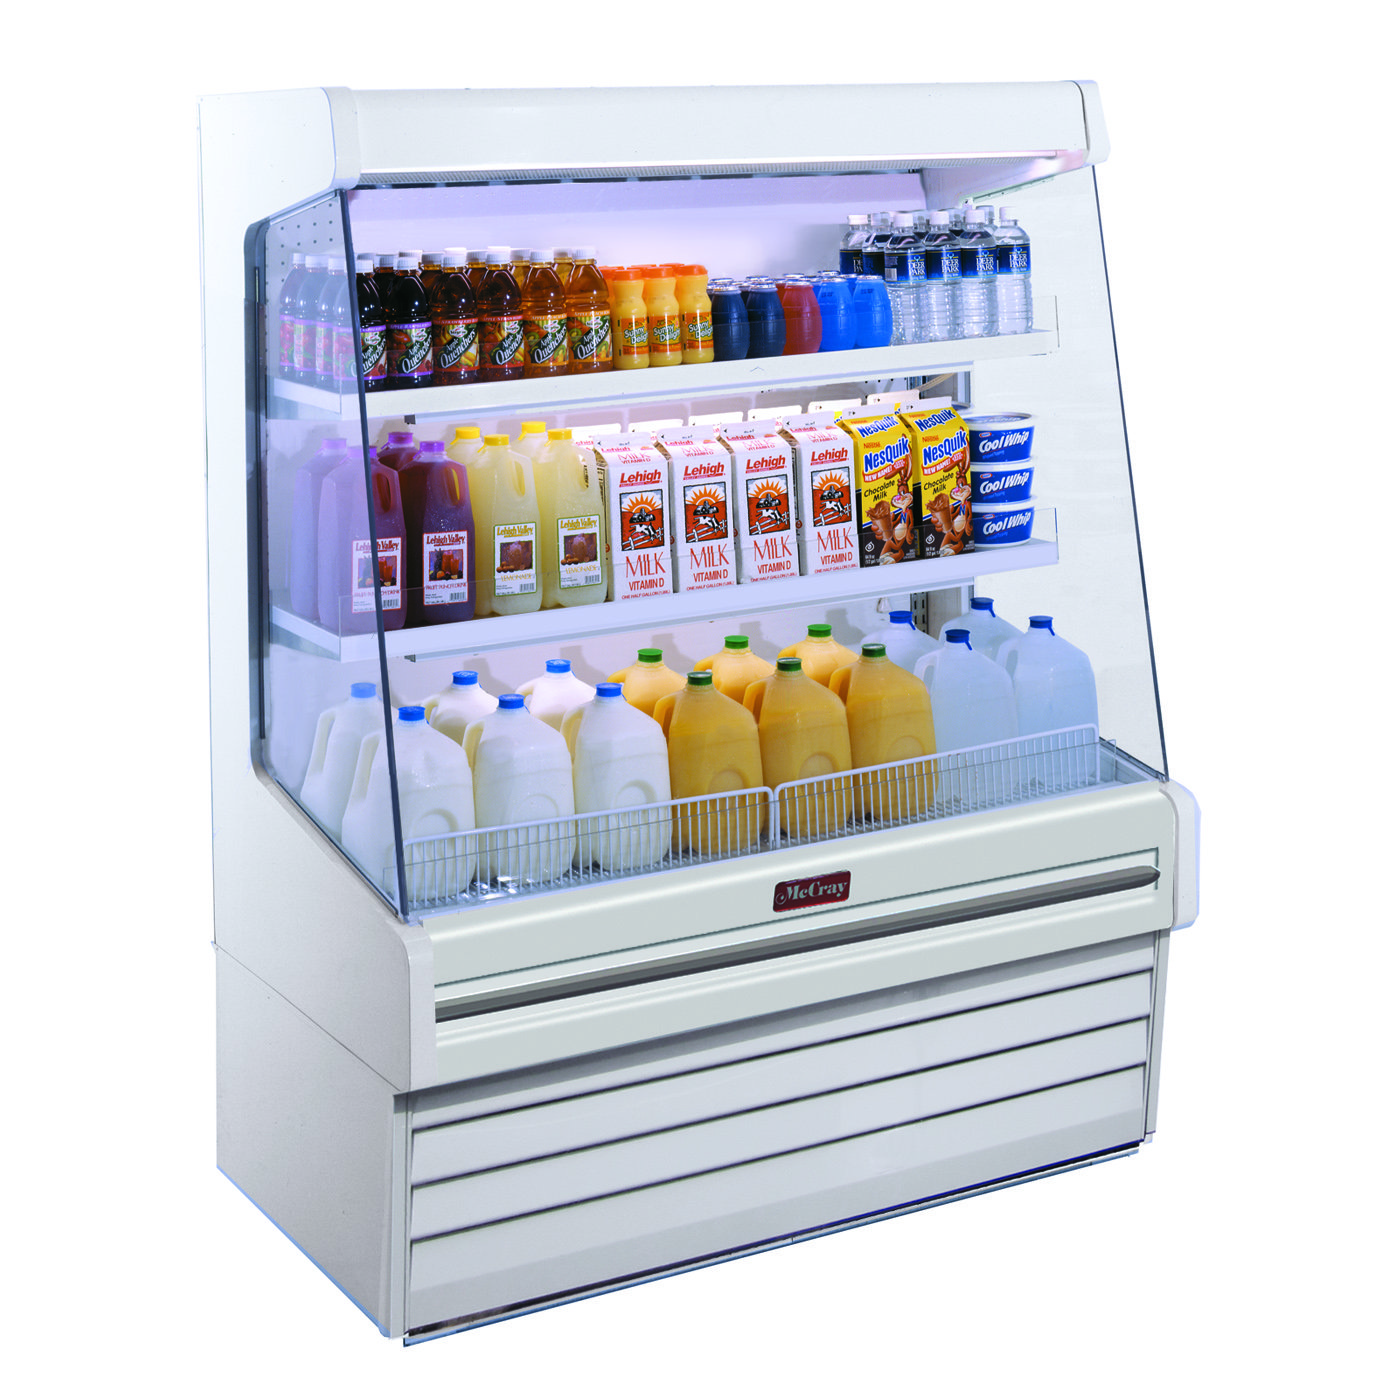 Howard-McCray SC-OD30E-3L-LED 39'' Vertical Dairy Open Air Merchandiser in White, Self-Contained, 2 Shelves, w/ LED Lighting